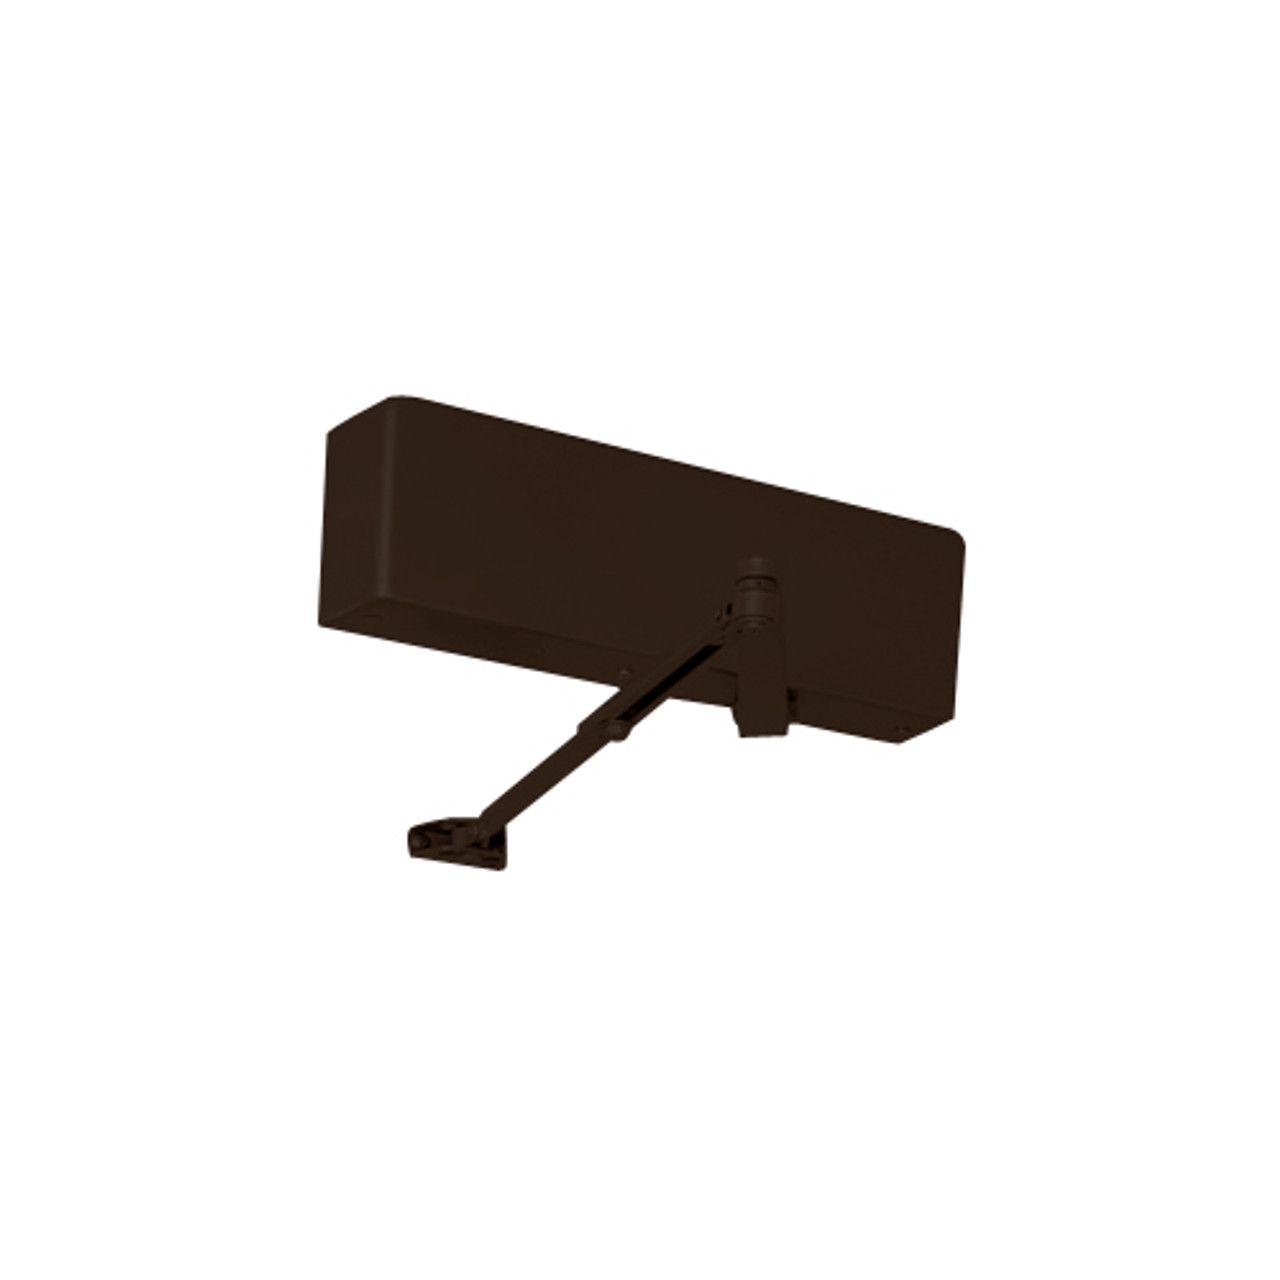 J7500-690 Norton 7500 Series Non-Hold Open Institutional Door Closer with Top Jamb Only Reveals 2-3/4 to 7 inch to 150 Degree in Statuary Bronze Finish